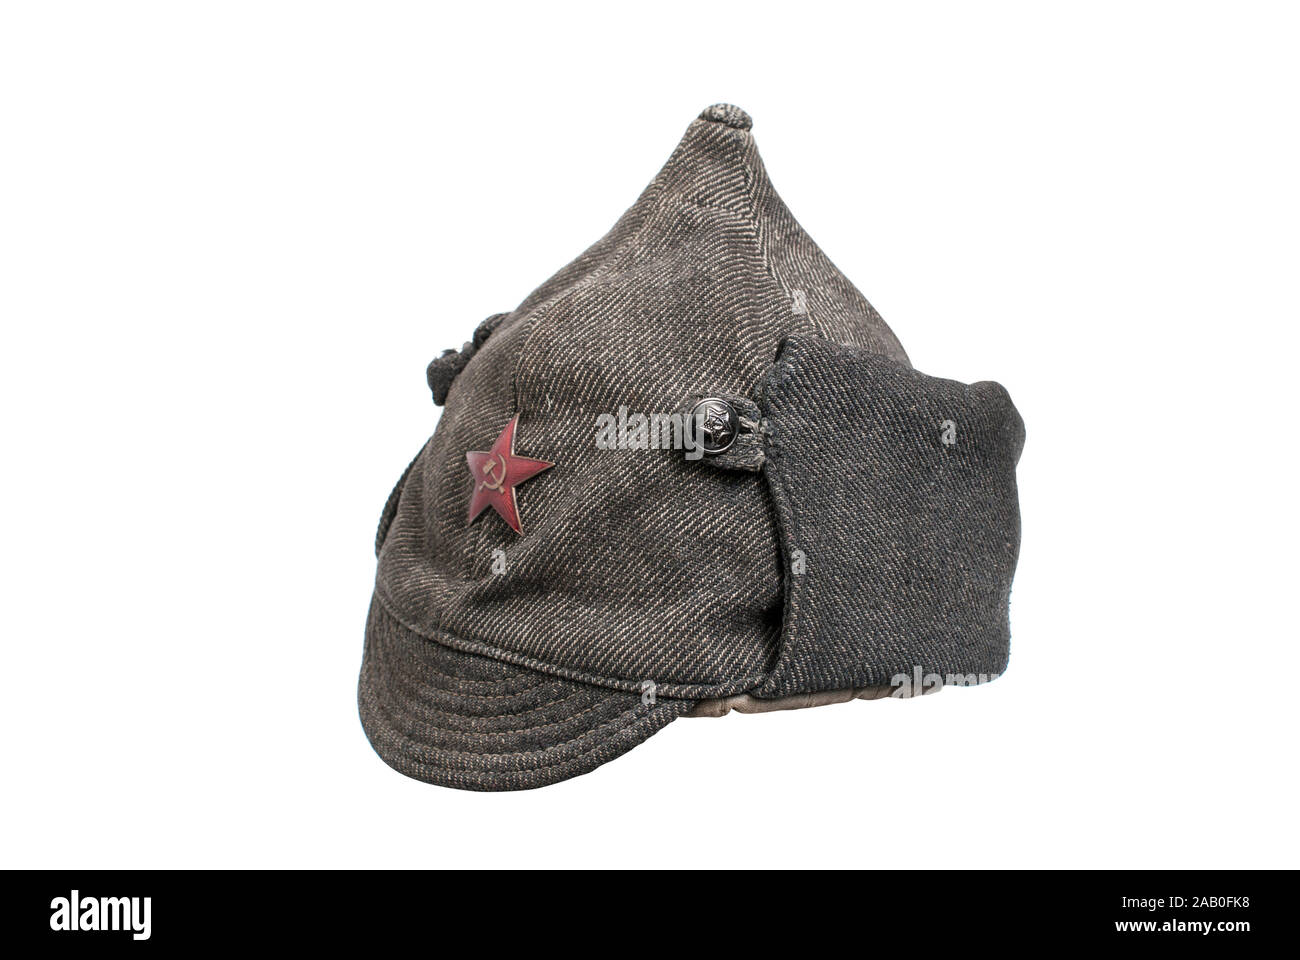 USSR (Russia) history. USSR military cap (Budenny cap) - pointed helmet formerly worn by Red Army men. 1933. Russia. Stock Photo